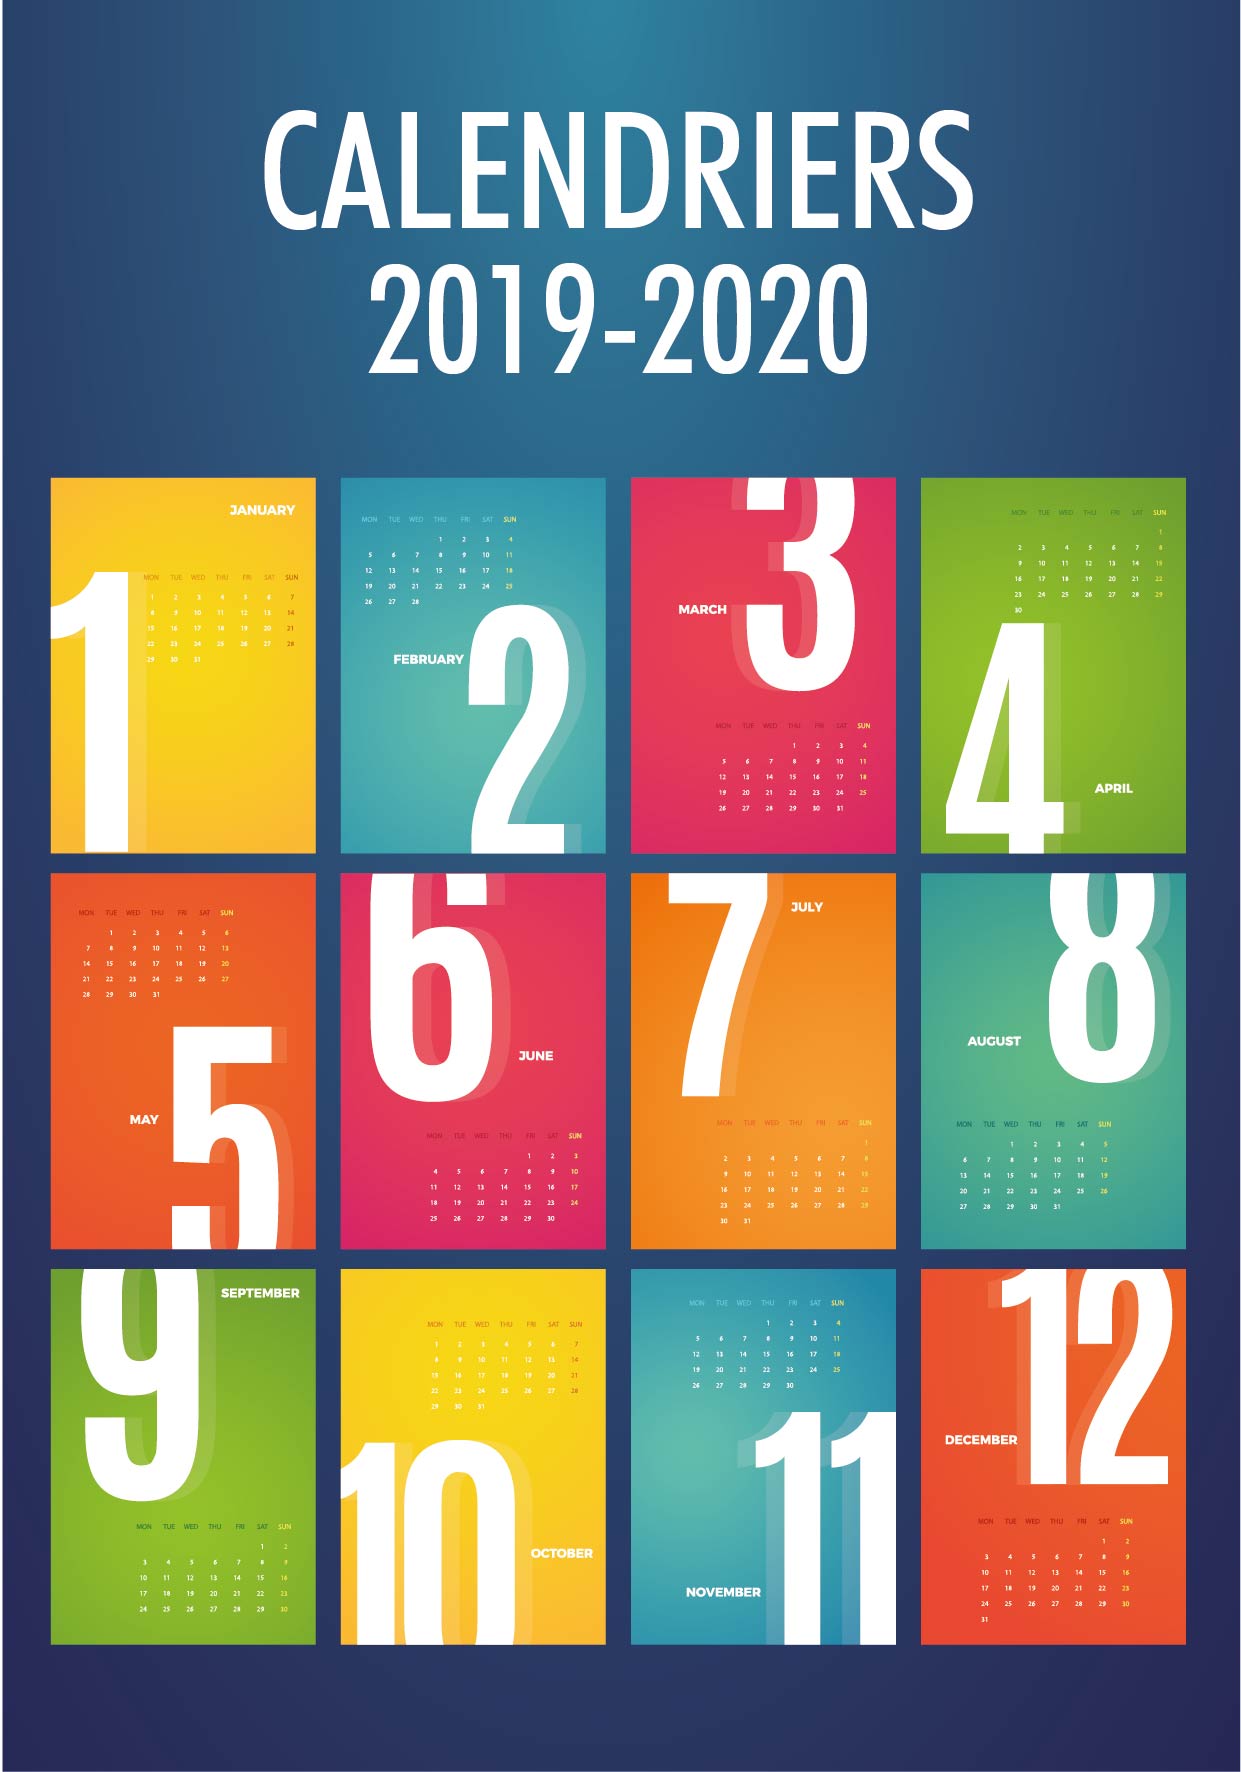 Calendriers Scolaires 2019-2020